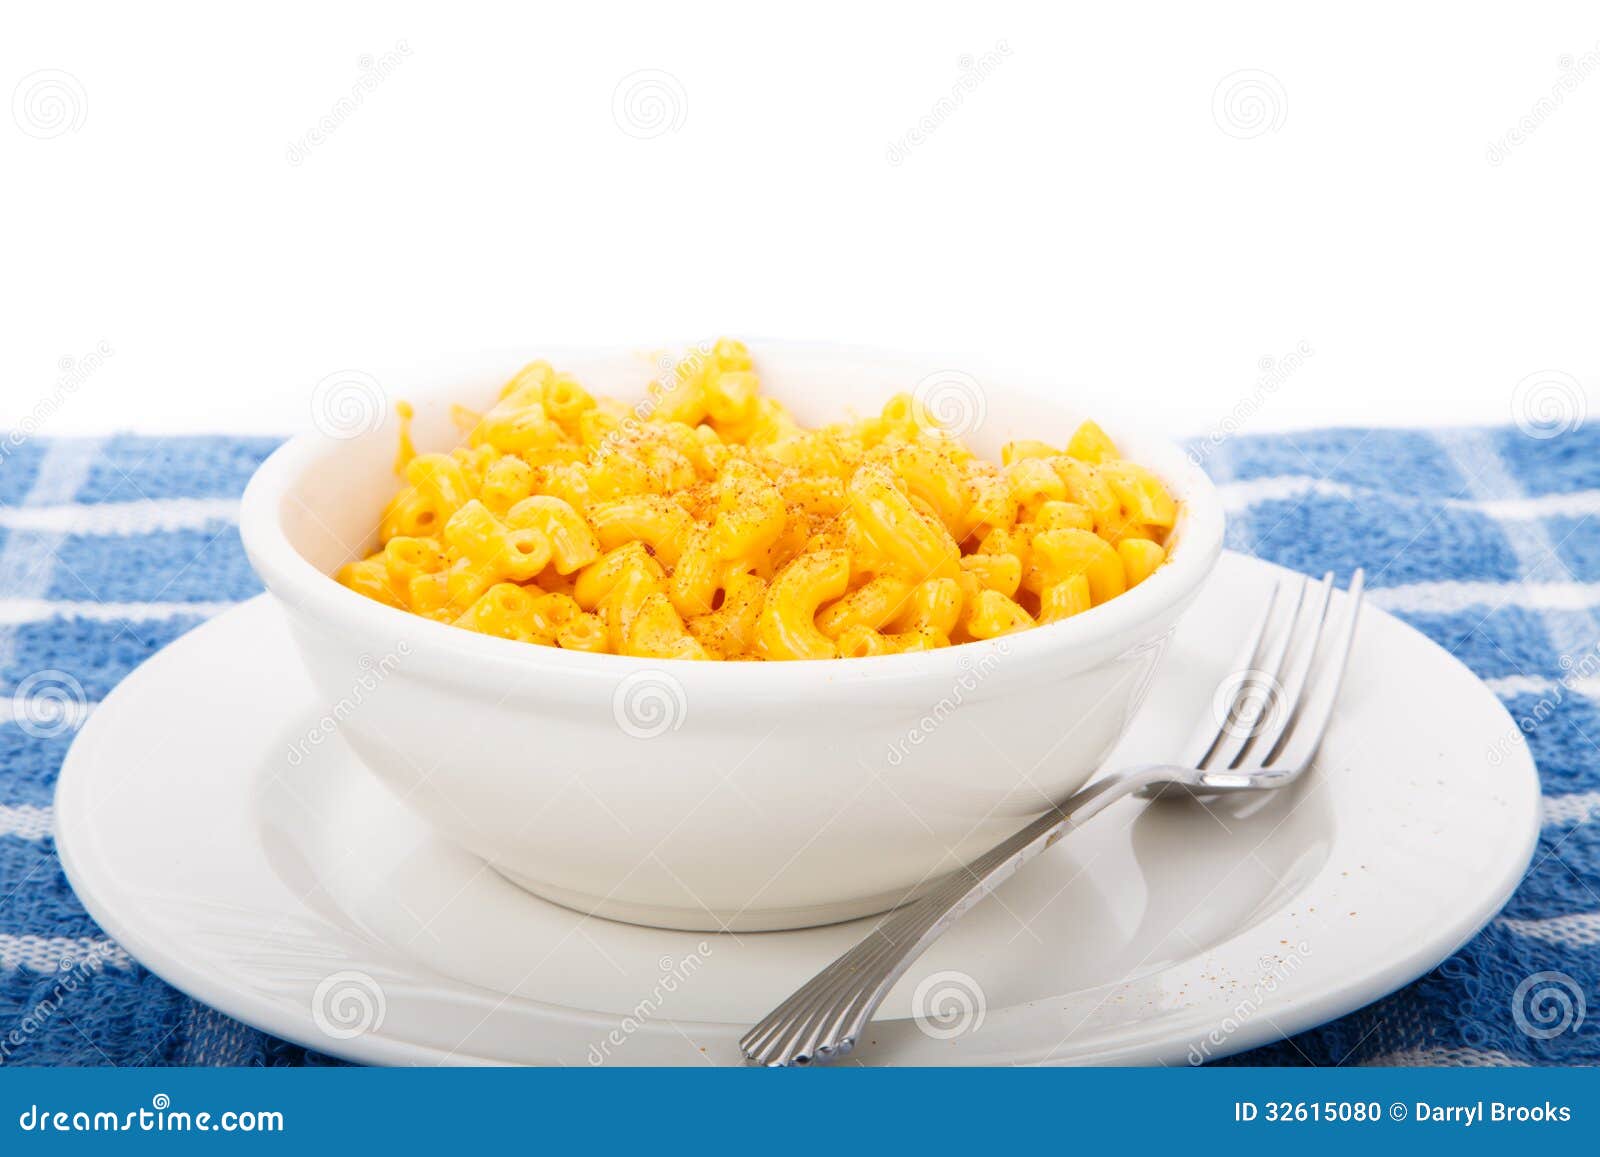 mac cheese white bowl macaroni made packaged mix blue placemat 32615080